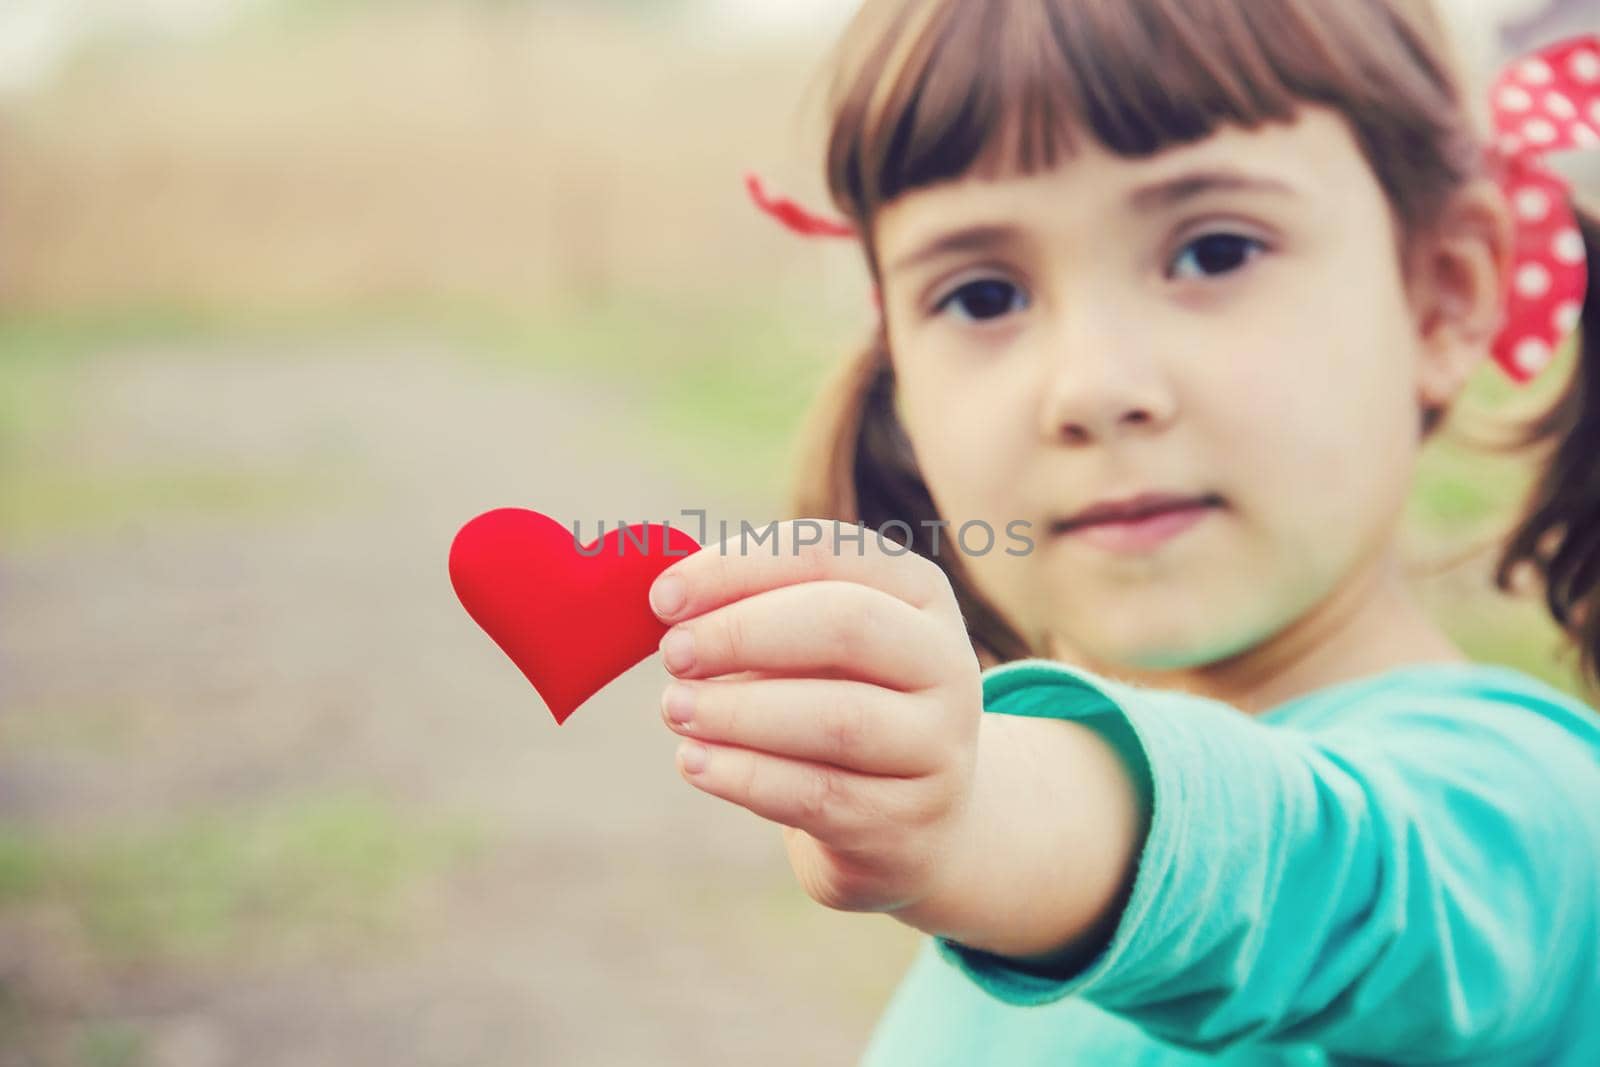 The heart is in the hands of the child. Selective focus.